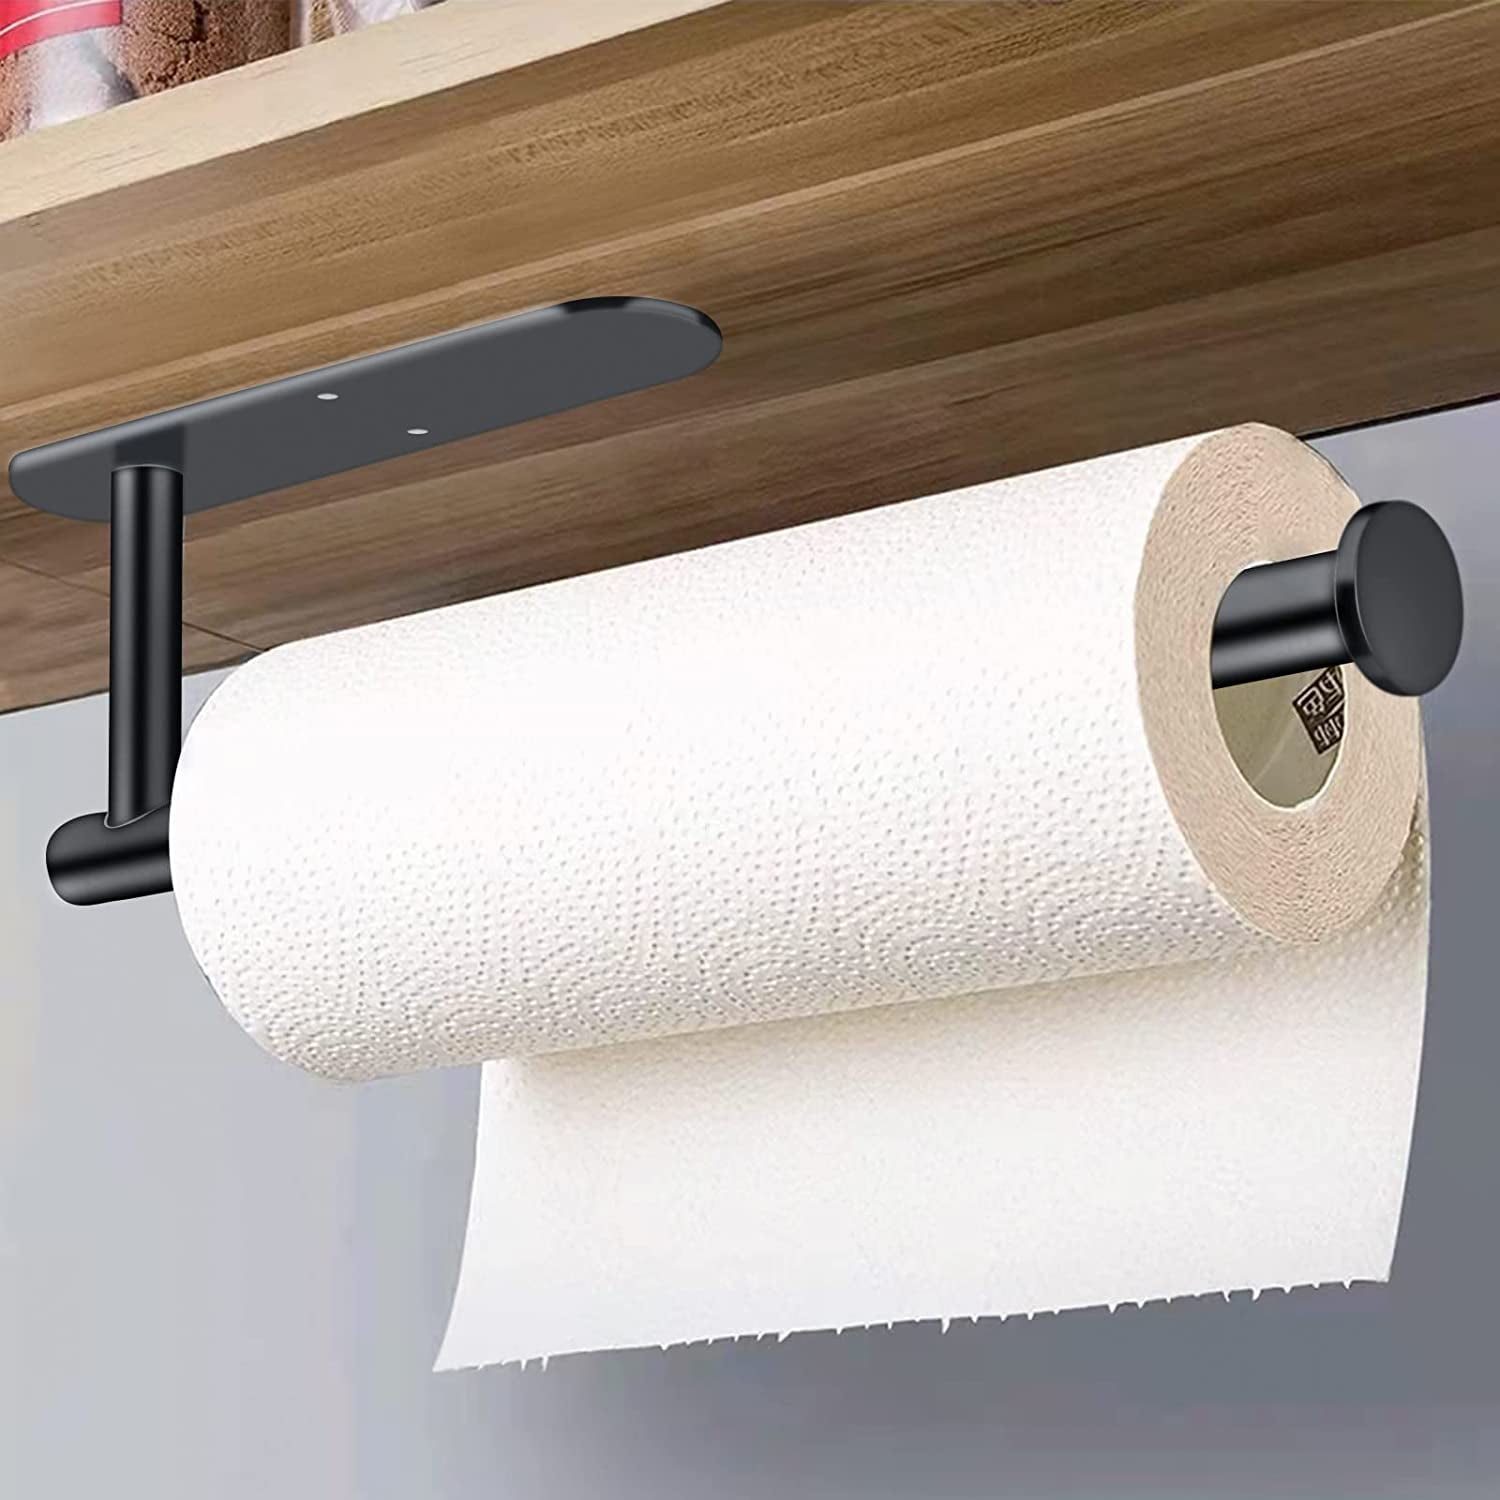 Self-Adhesive Kitchen Paper Towel Rack Toilet Roll Holder Wall Mount Tissue 